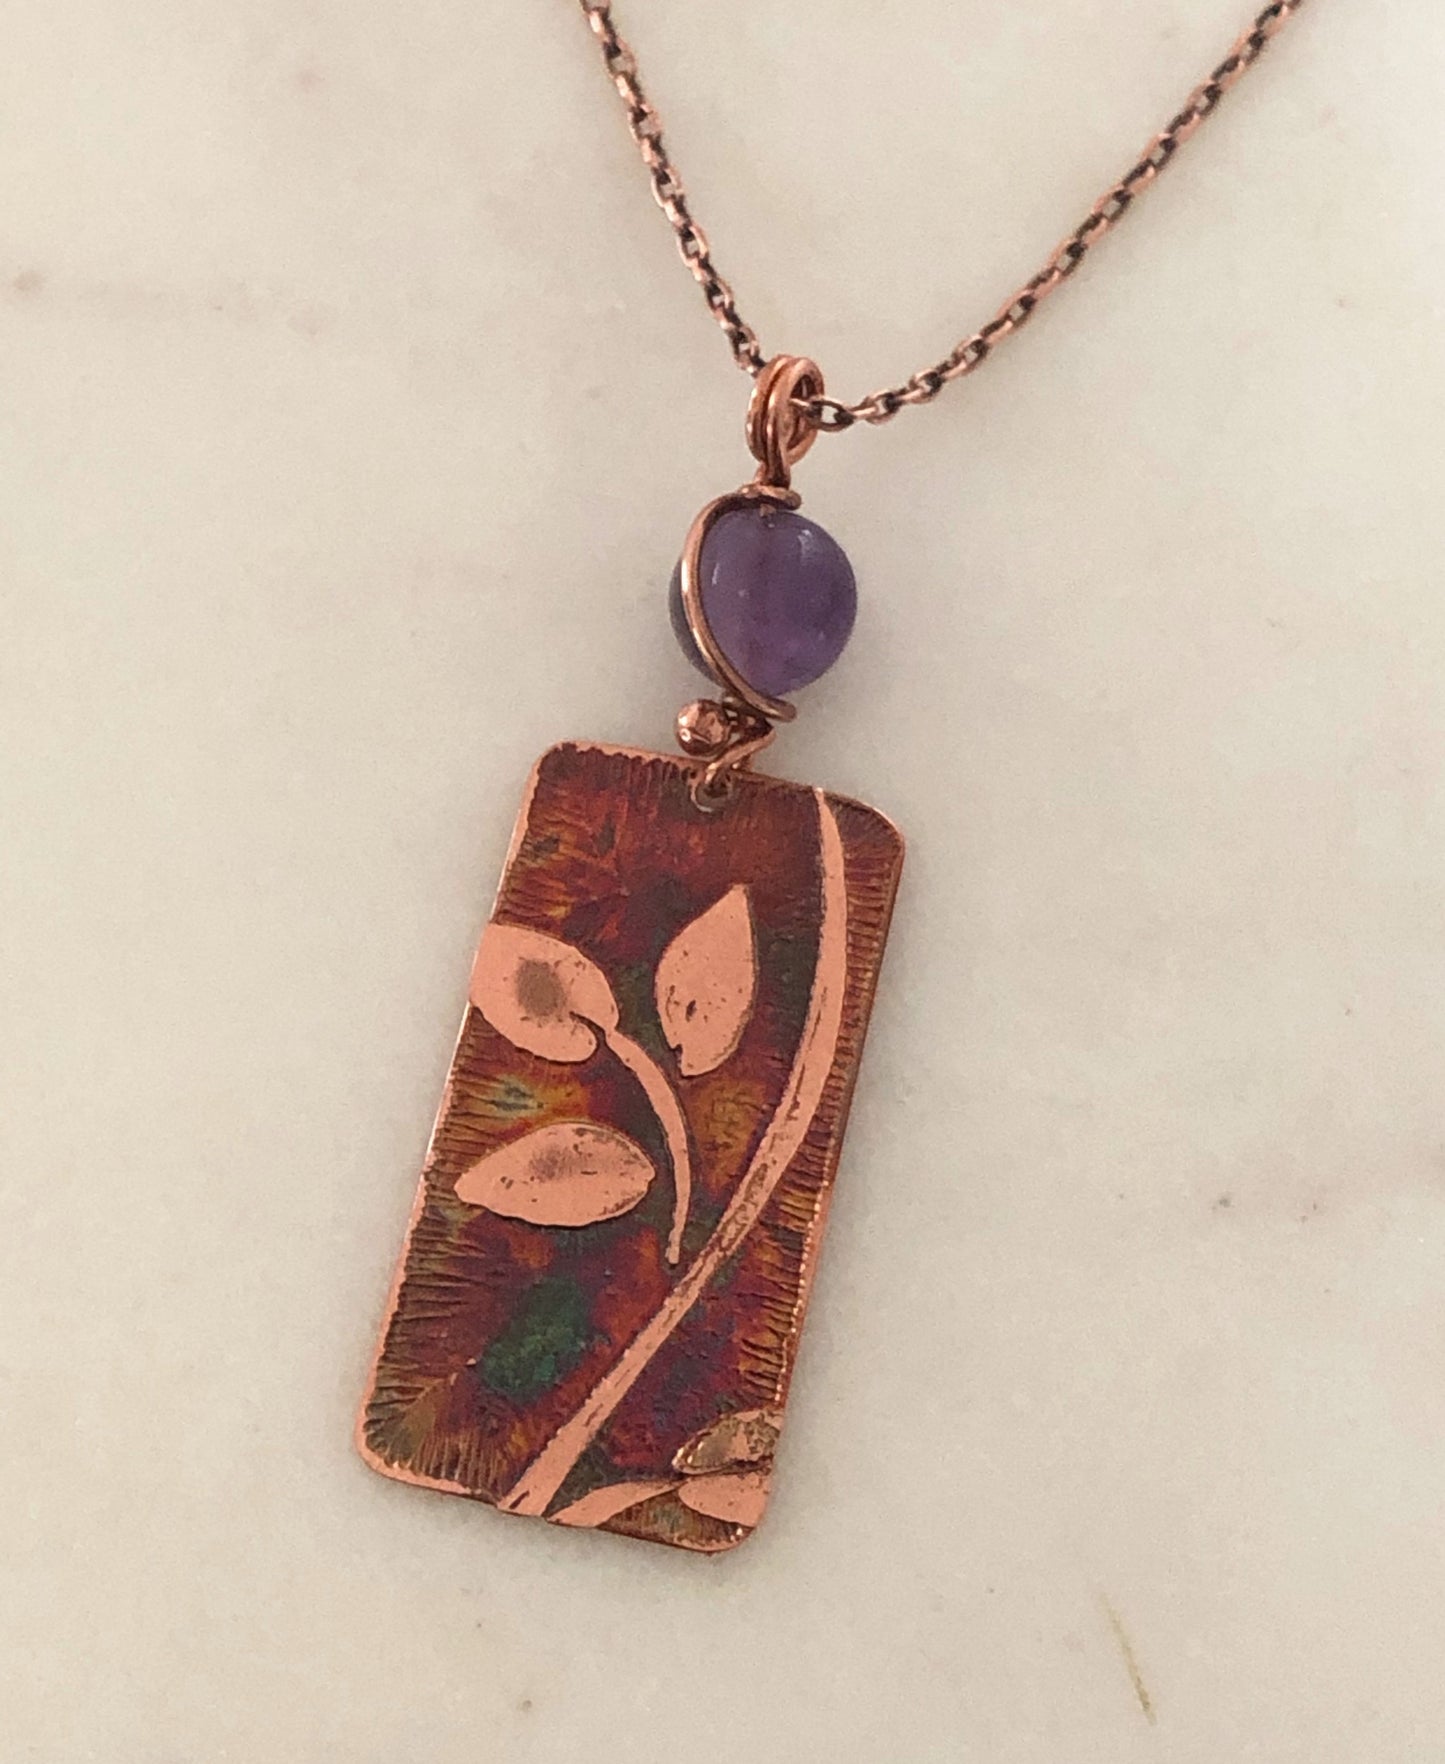 Acid etched copper leaf necklace with amethyst